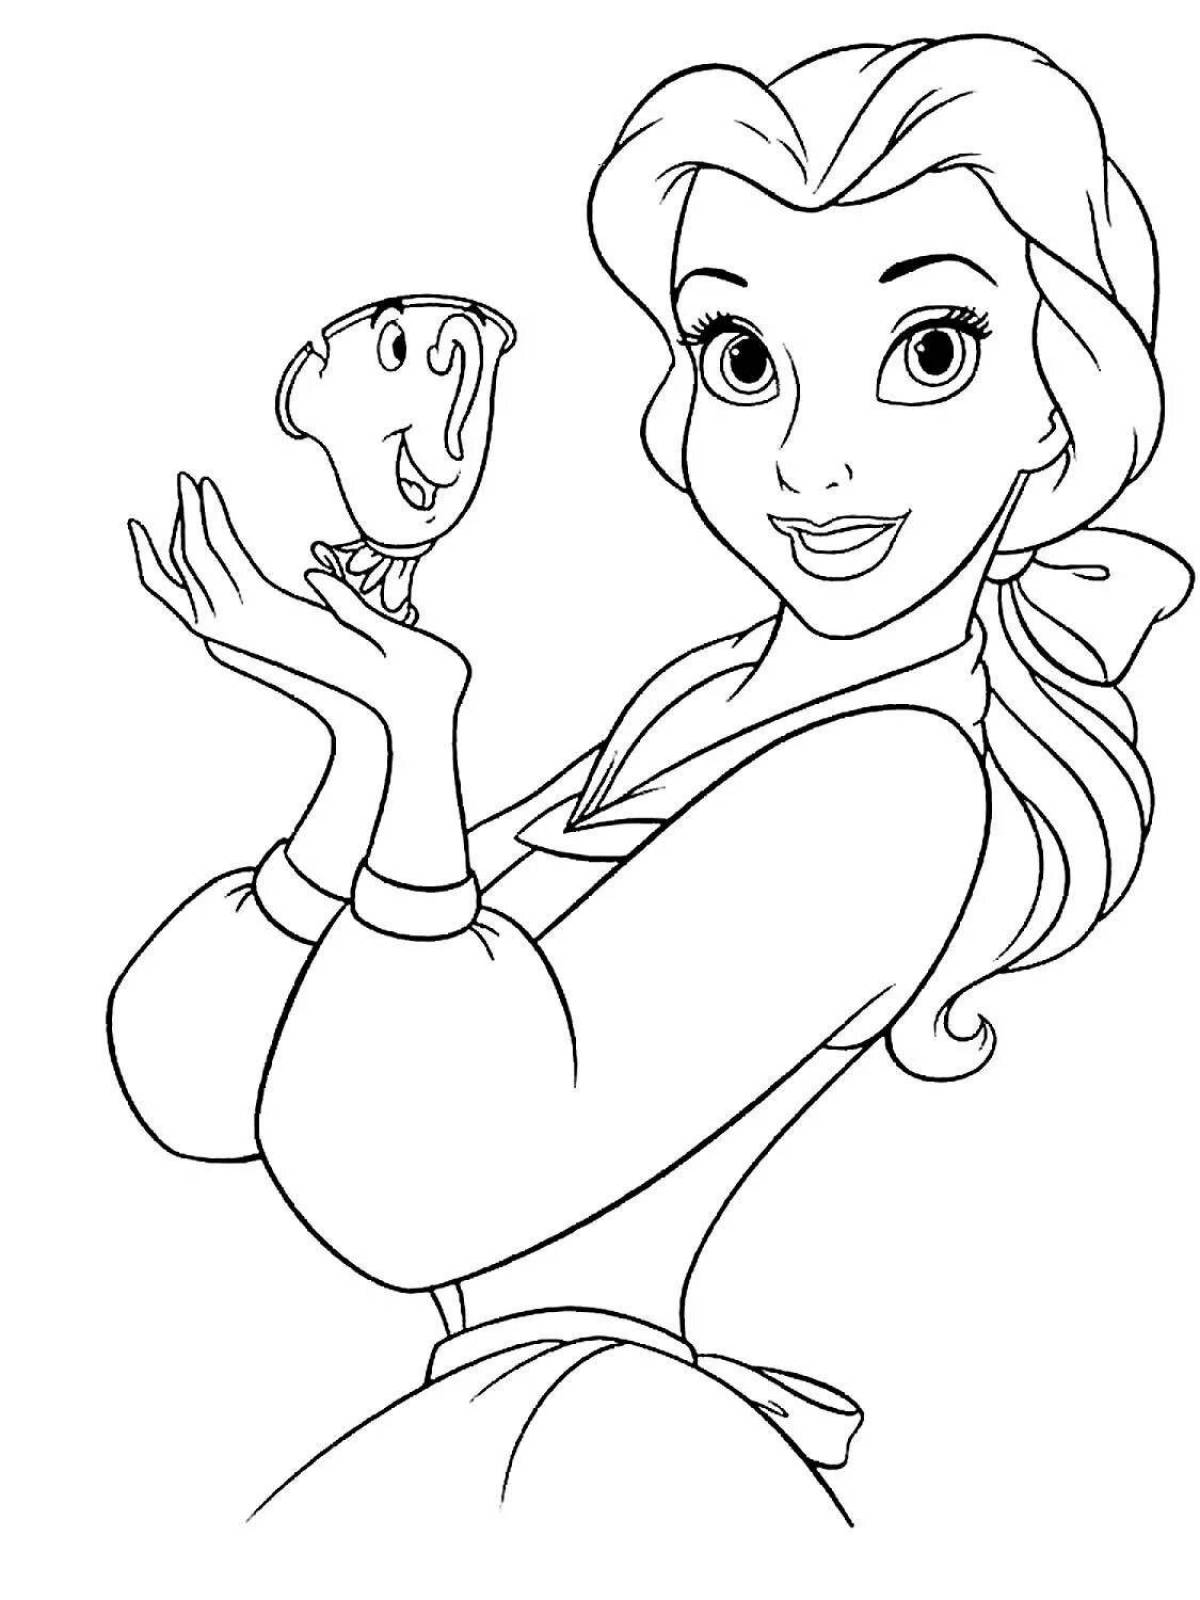 Cute disney character coloring pages